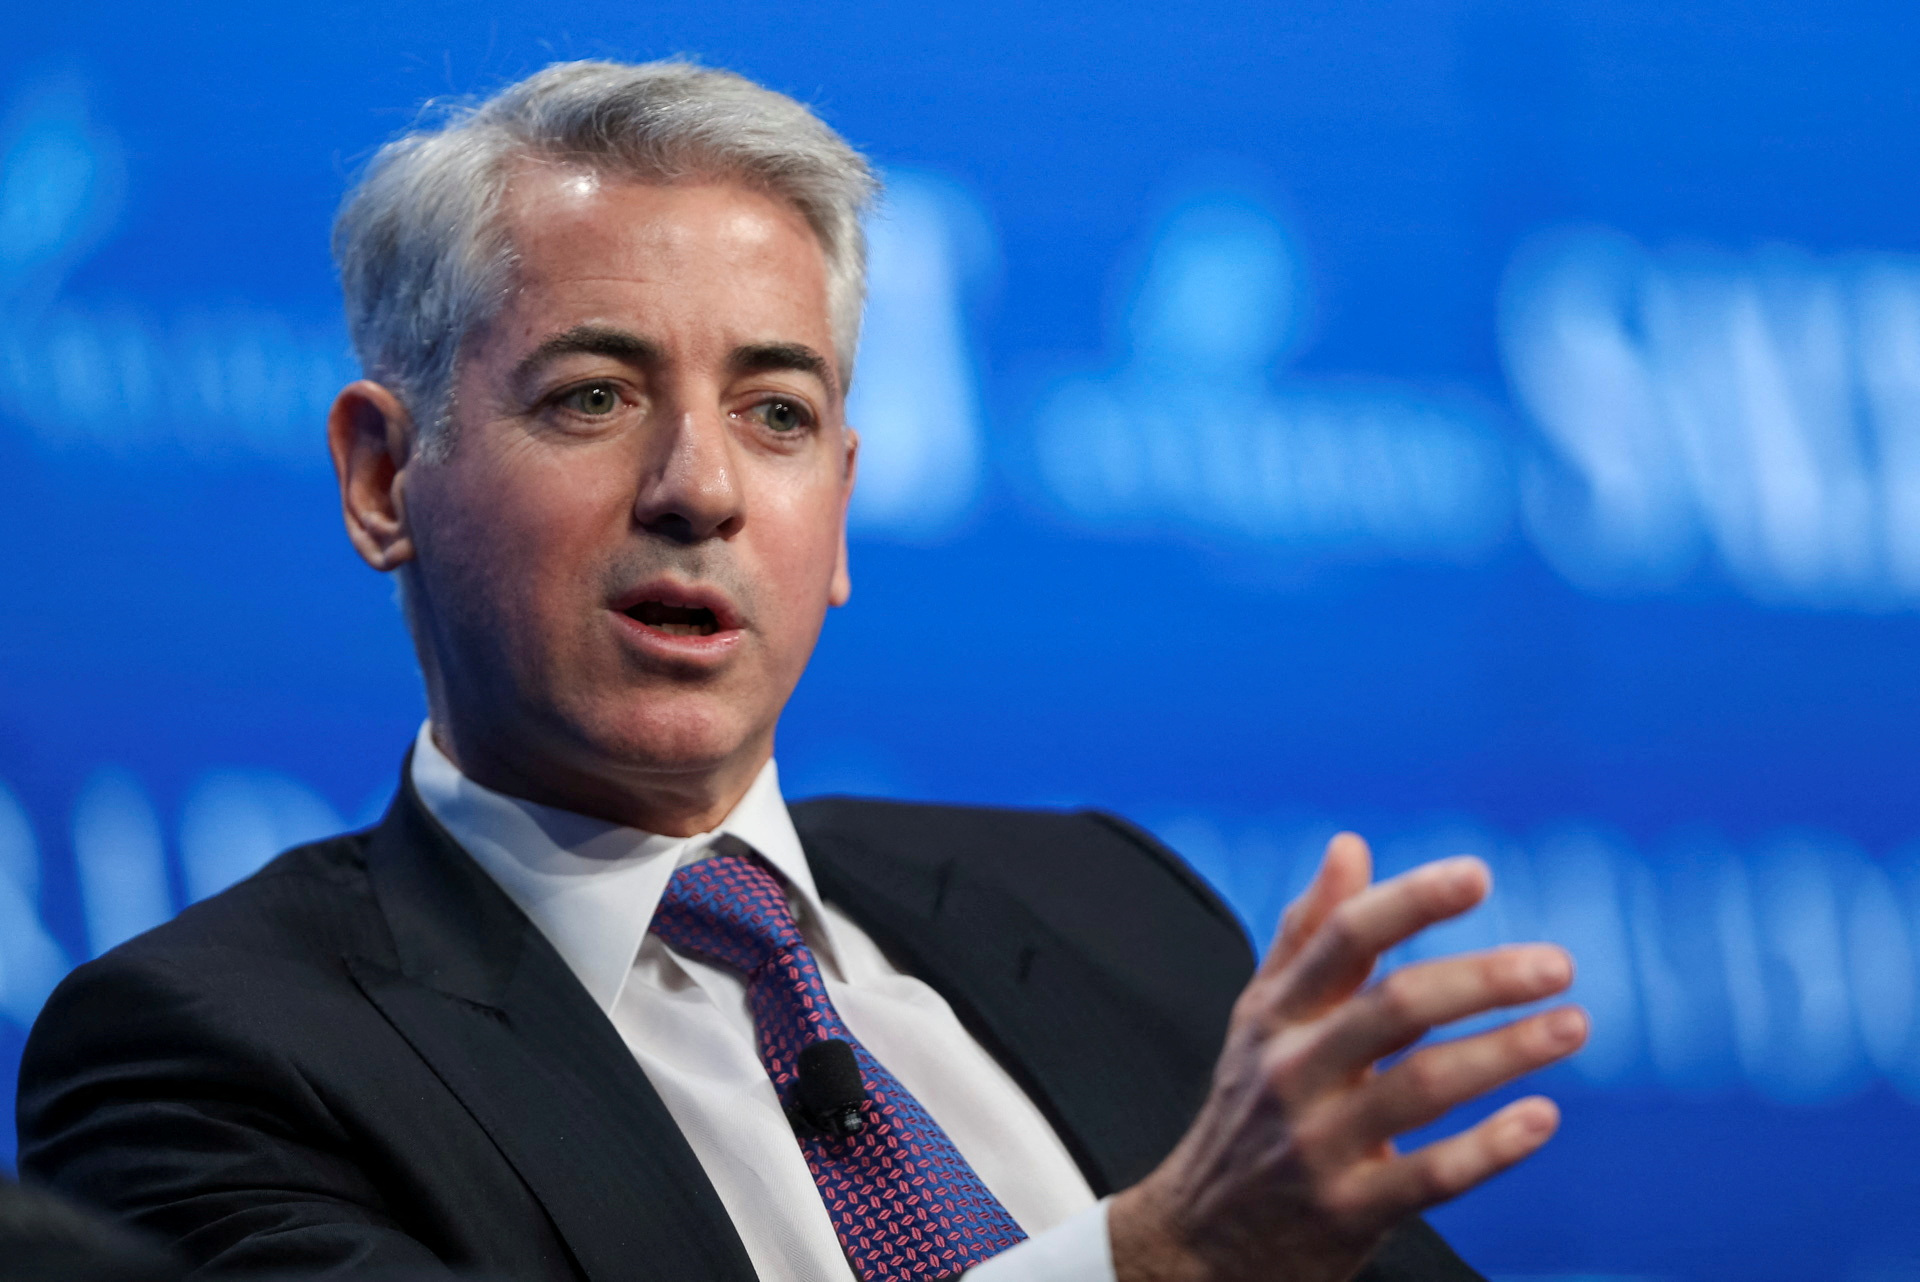 Bill Ackman, chief executive officer and portfolio manager at Pershing Square Capital Management, speaks during the SALT conference in Las Vegas